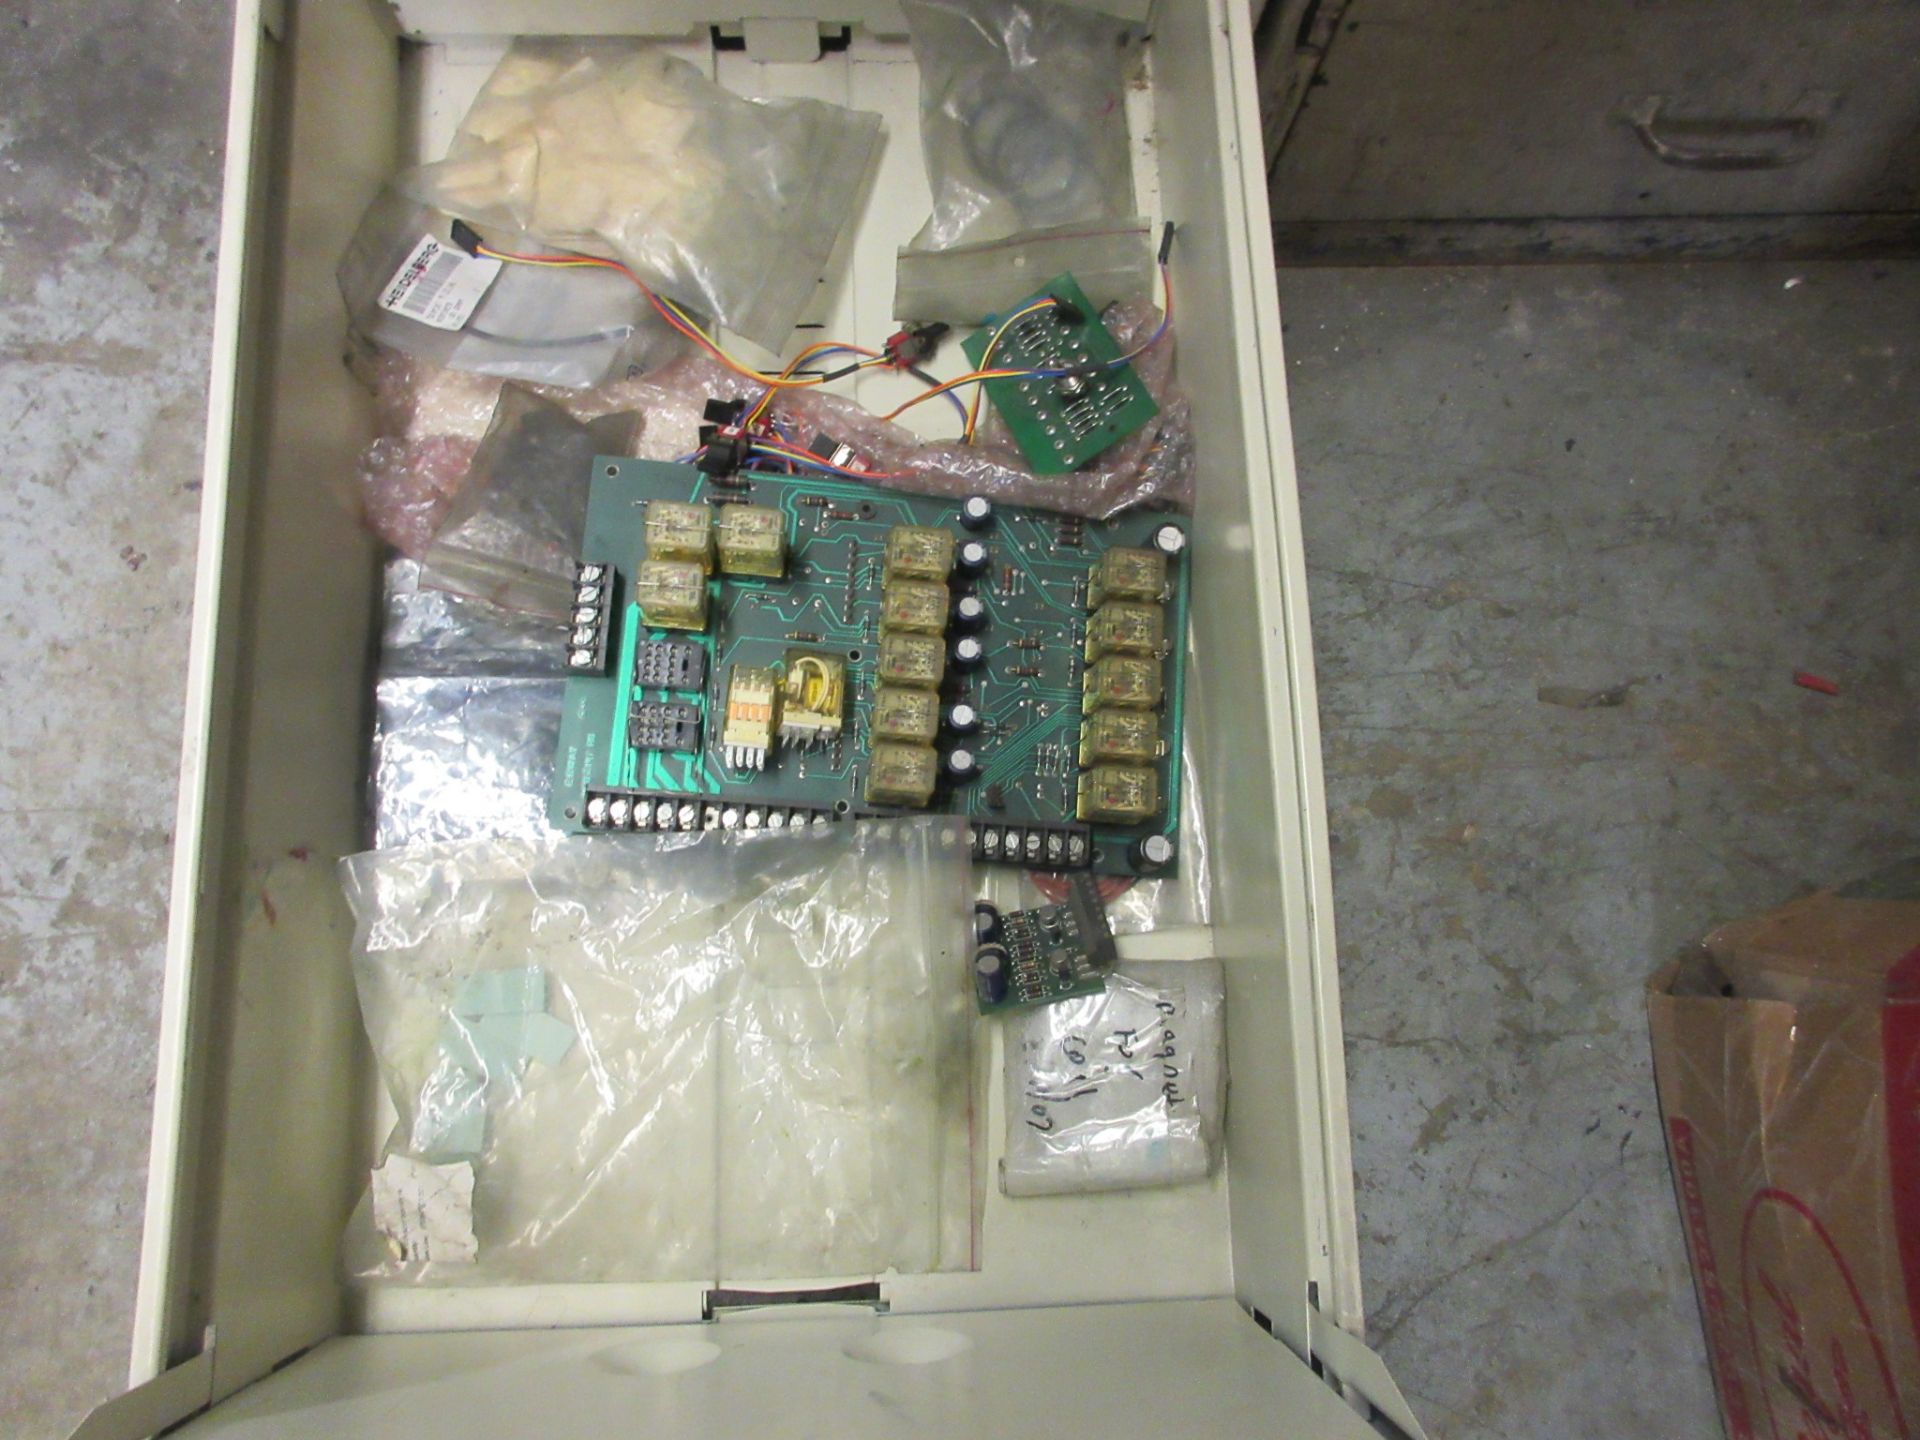 3-DRAWER FILE CABINET W/ ELECTRICAL BOARDS, PARTS, ETC. - Image 3 of 3